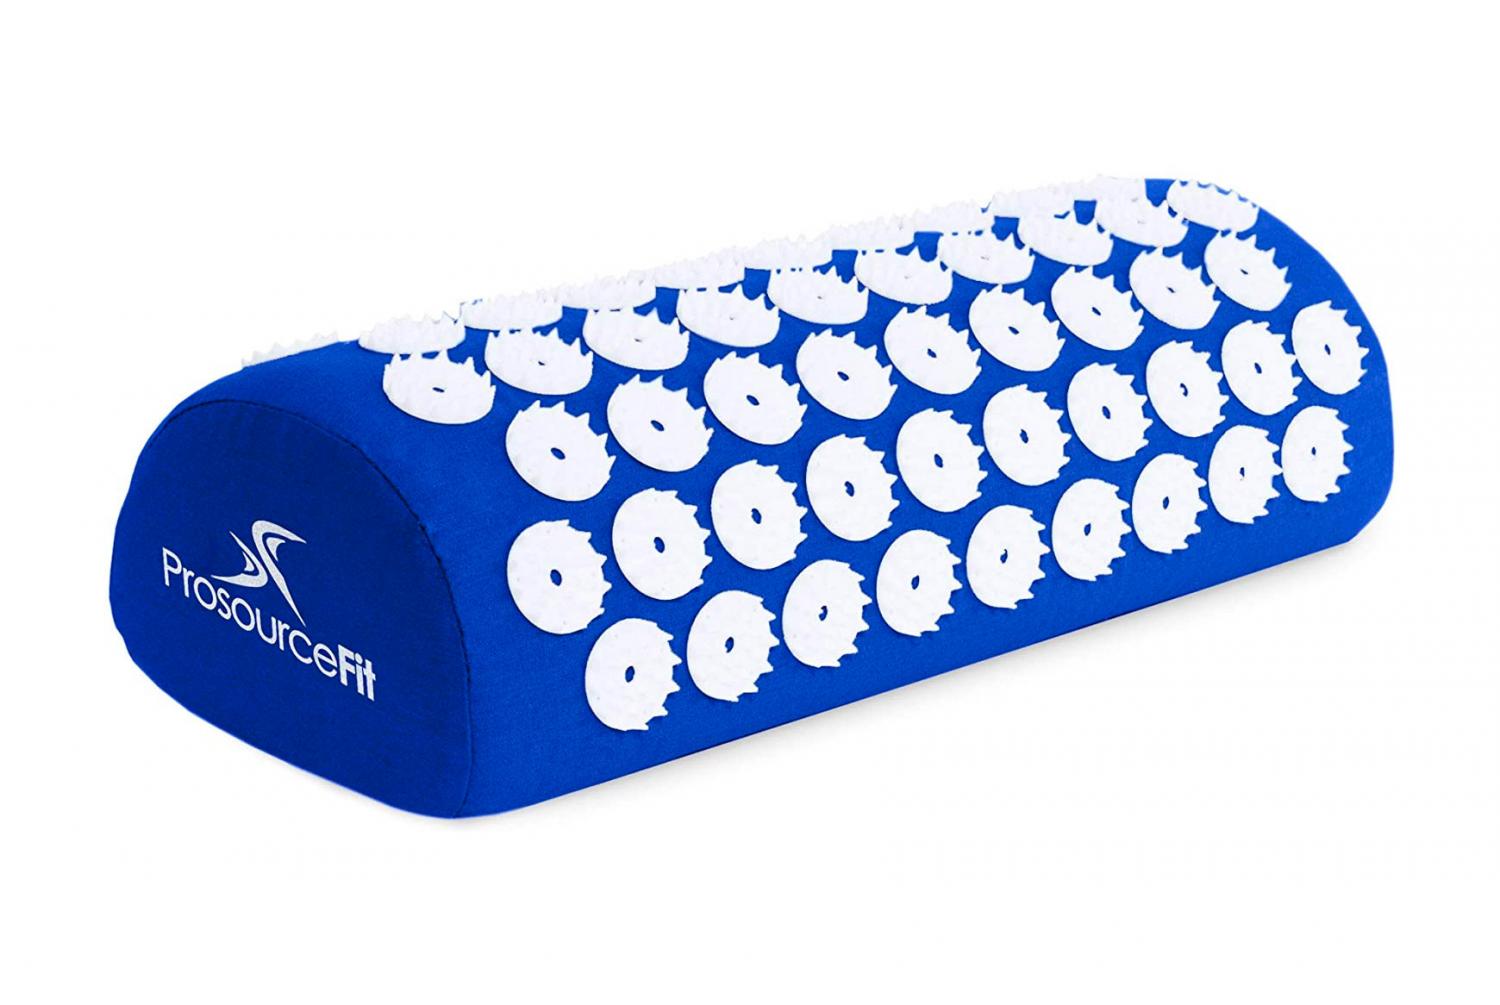 Acupuncture Mat and Acupuncture Pillow